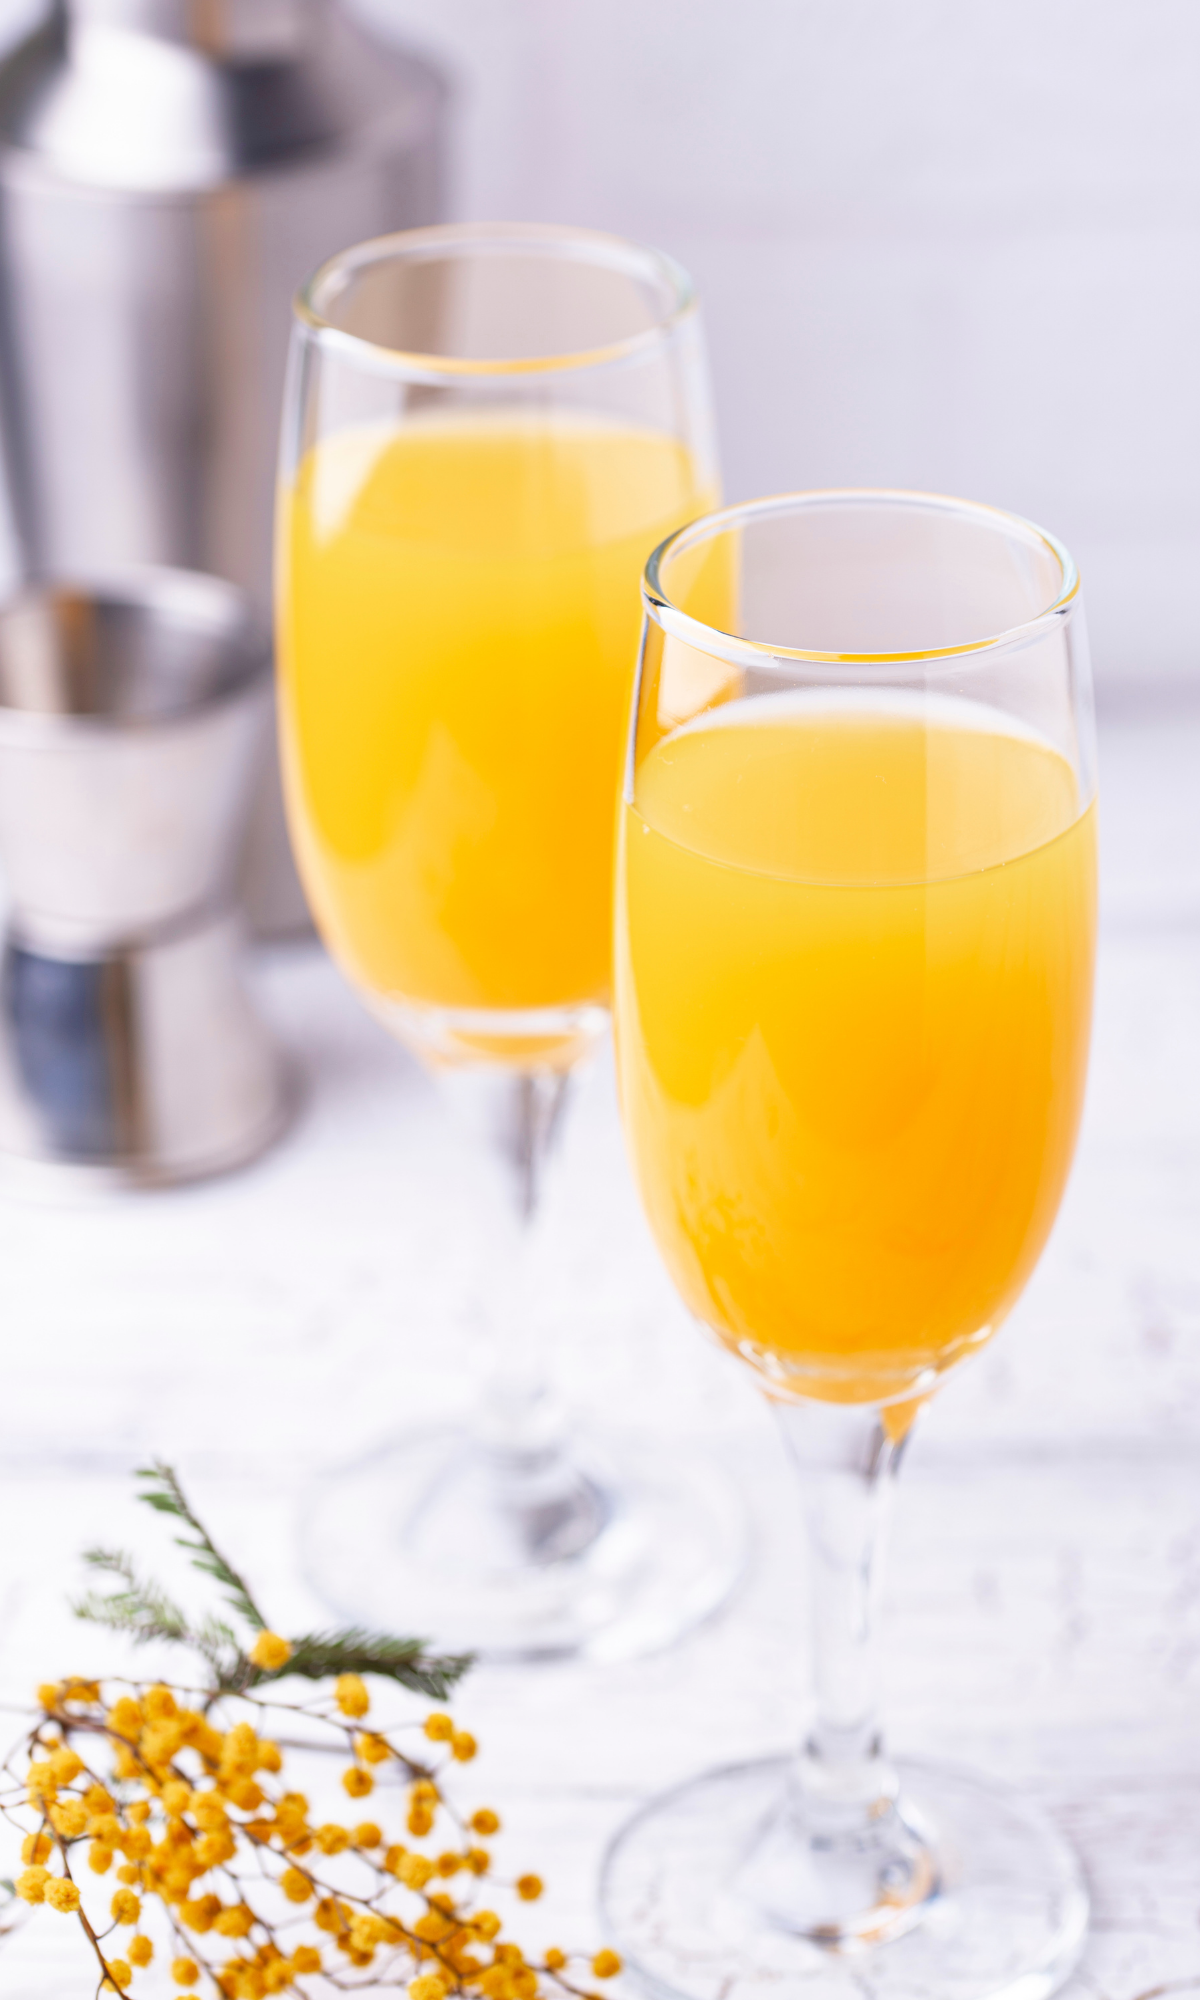 https://www.southerncravings.com/wp-content/uploads/2021/12/Mimosa-Recipe-3.png